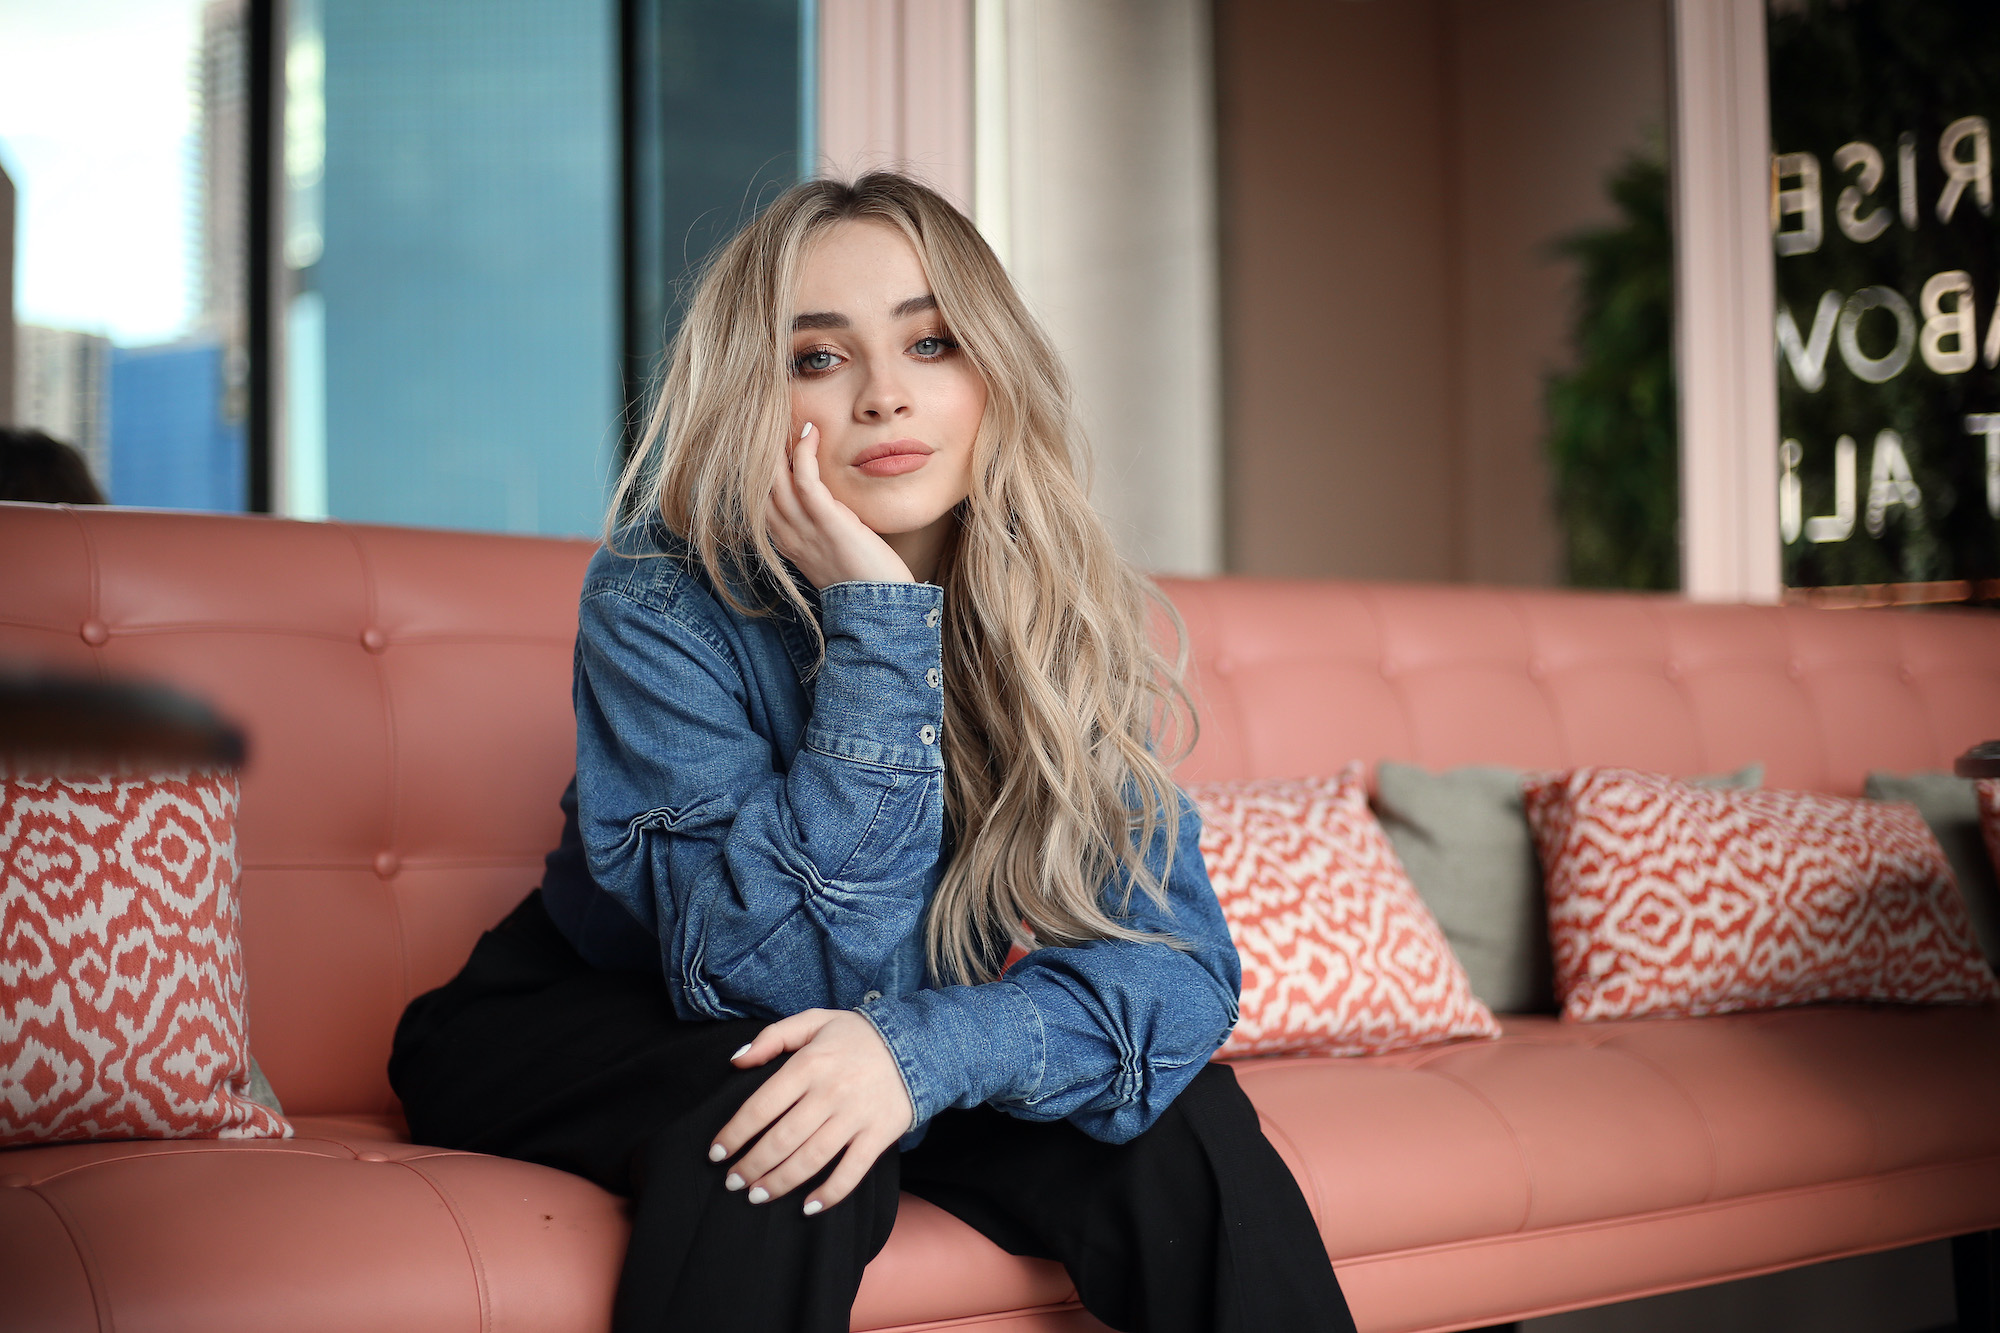 Sabrina Carpenter smiling slightly, sitting on a pink couch